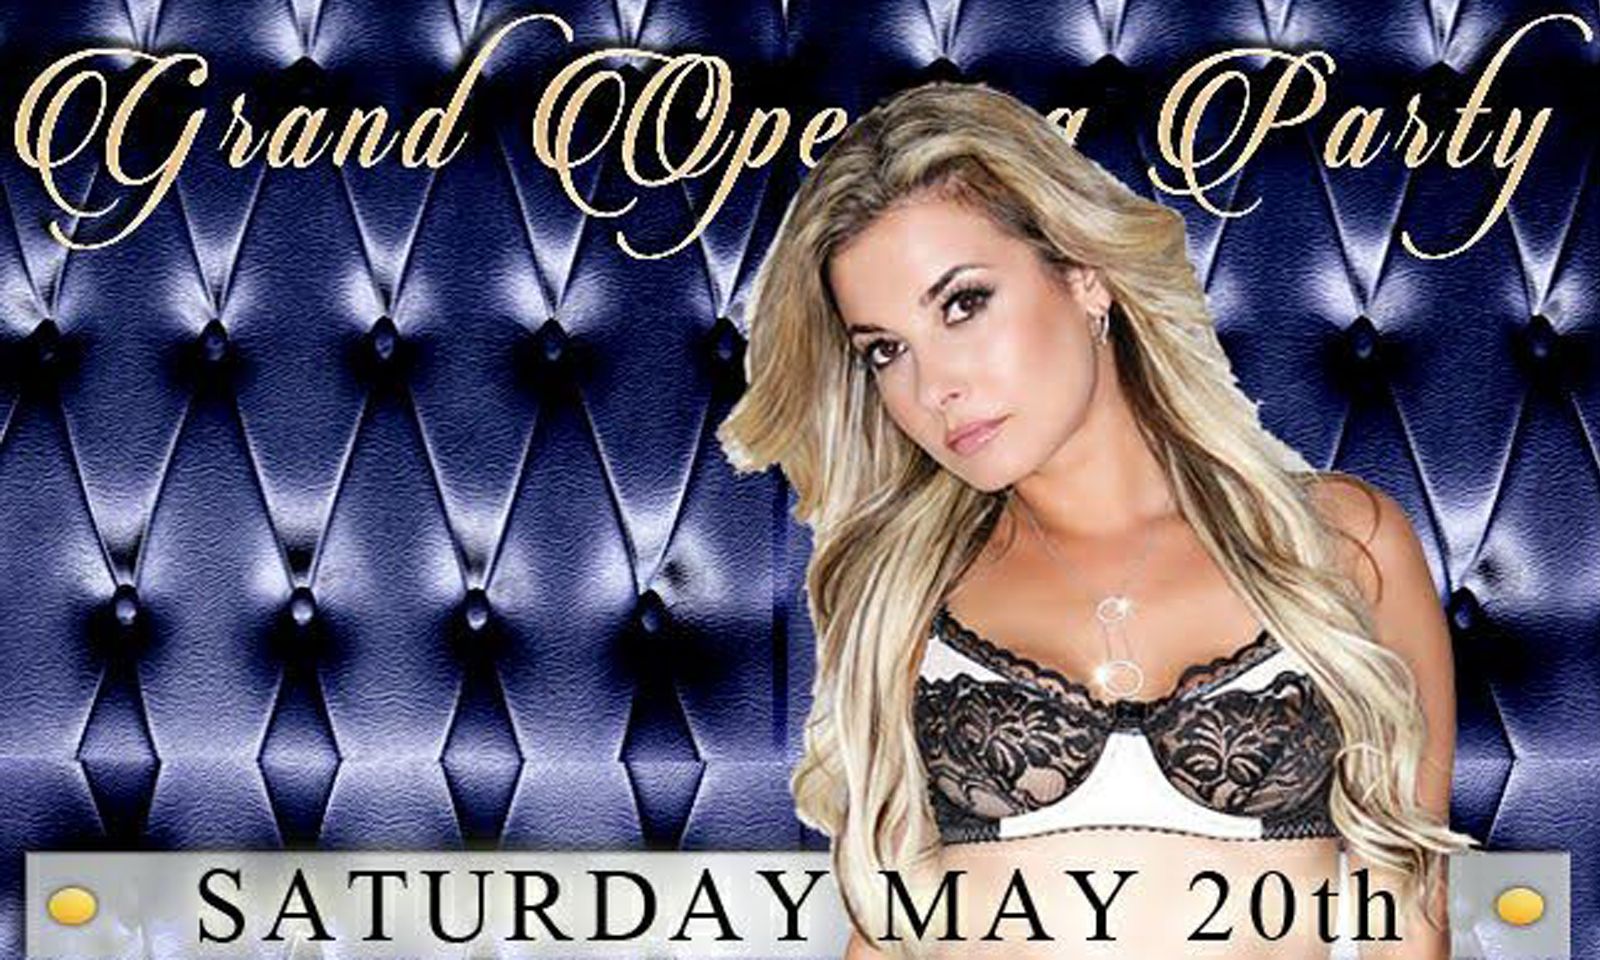 Alana Luv to Appear at Xcess Gentlemen's Club Grand Opening Party